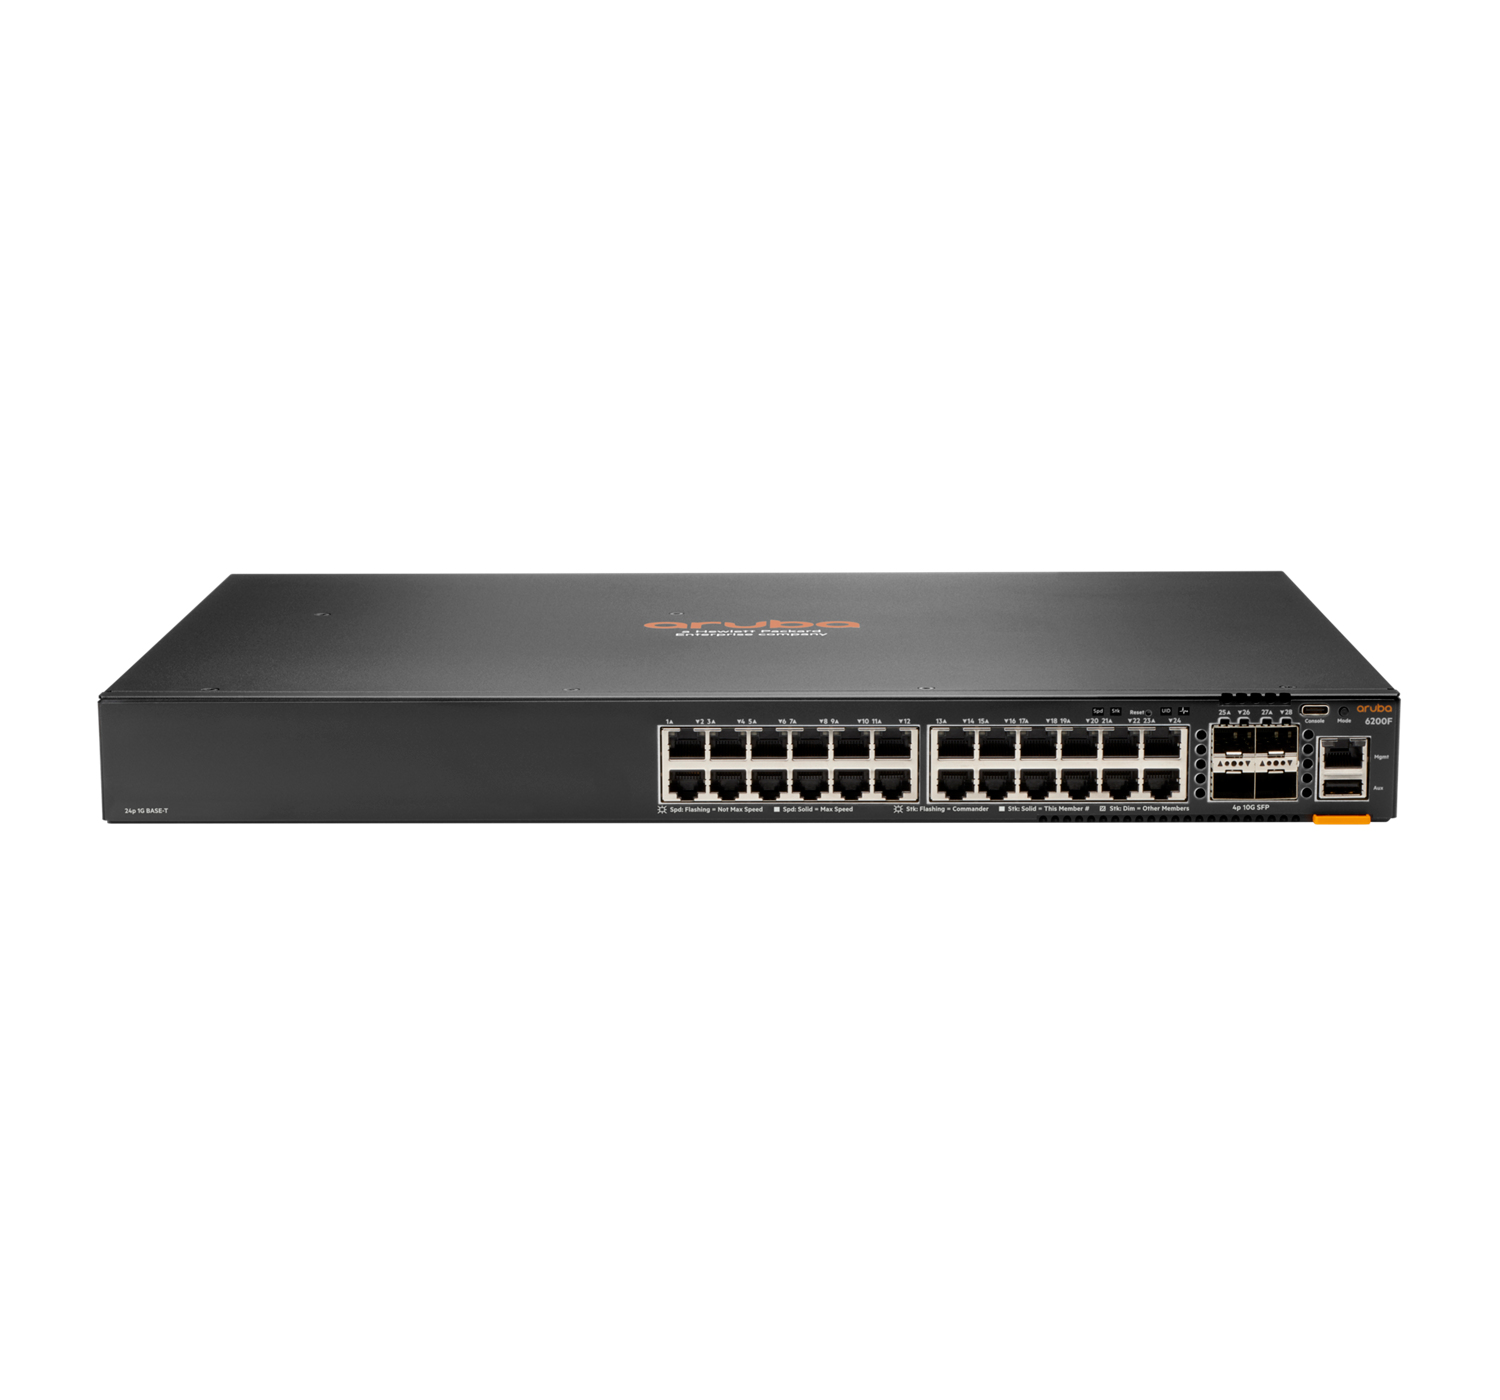 You Recently Viewed HPE Aruba JL725A CX 6200 24 Port L3 Managed PoE+ Switch 370W Image